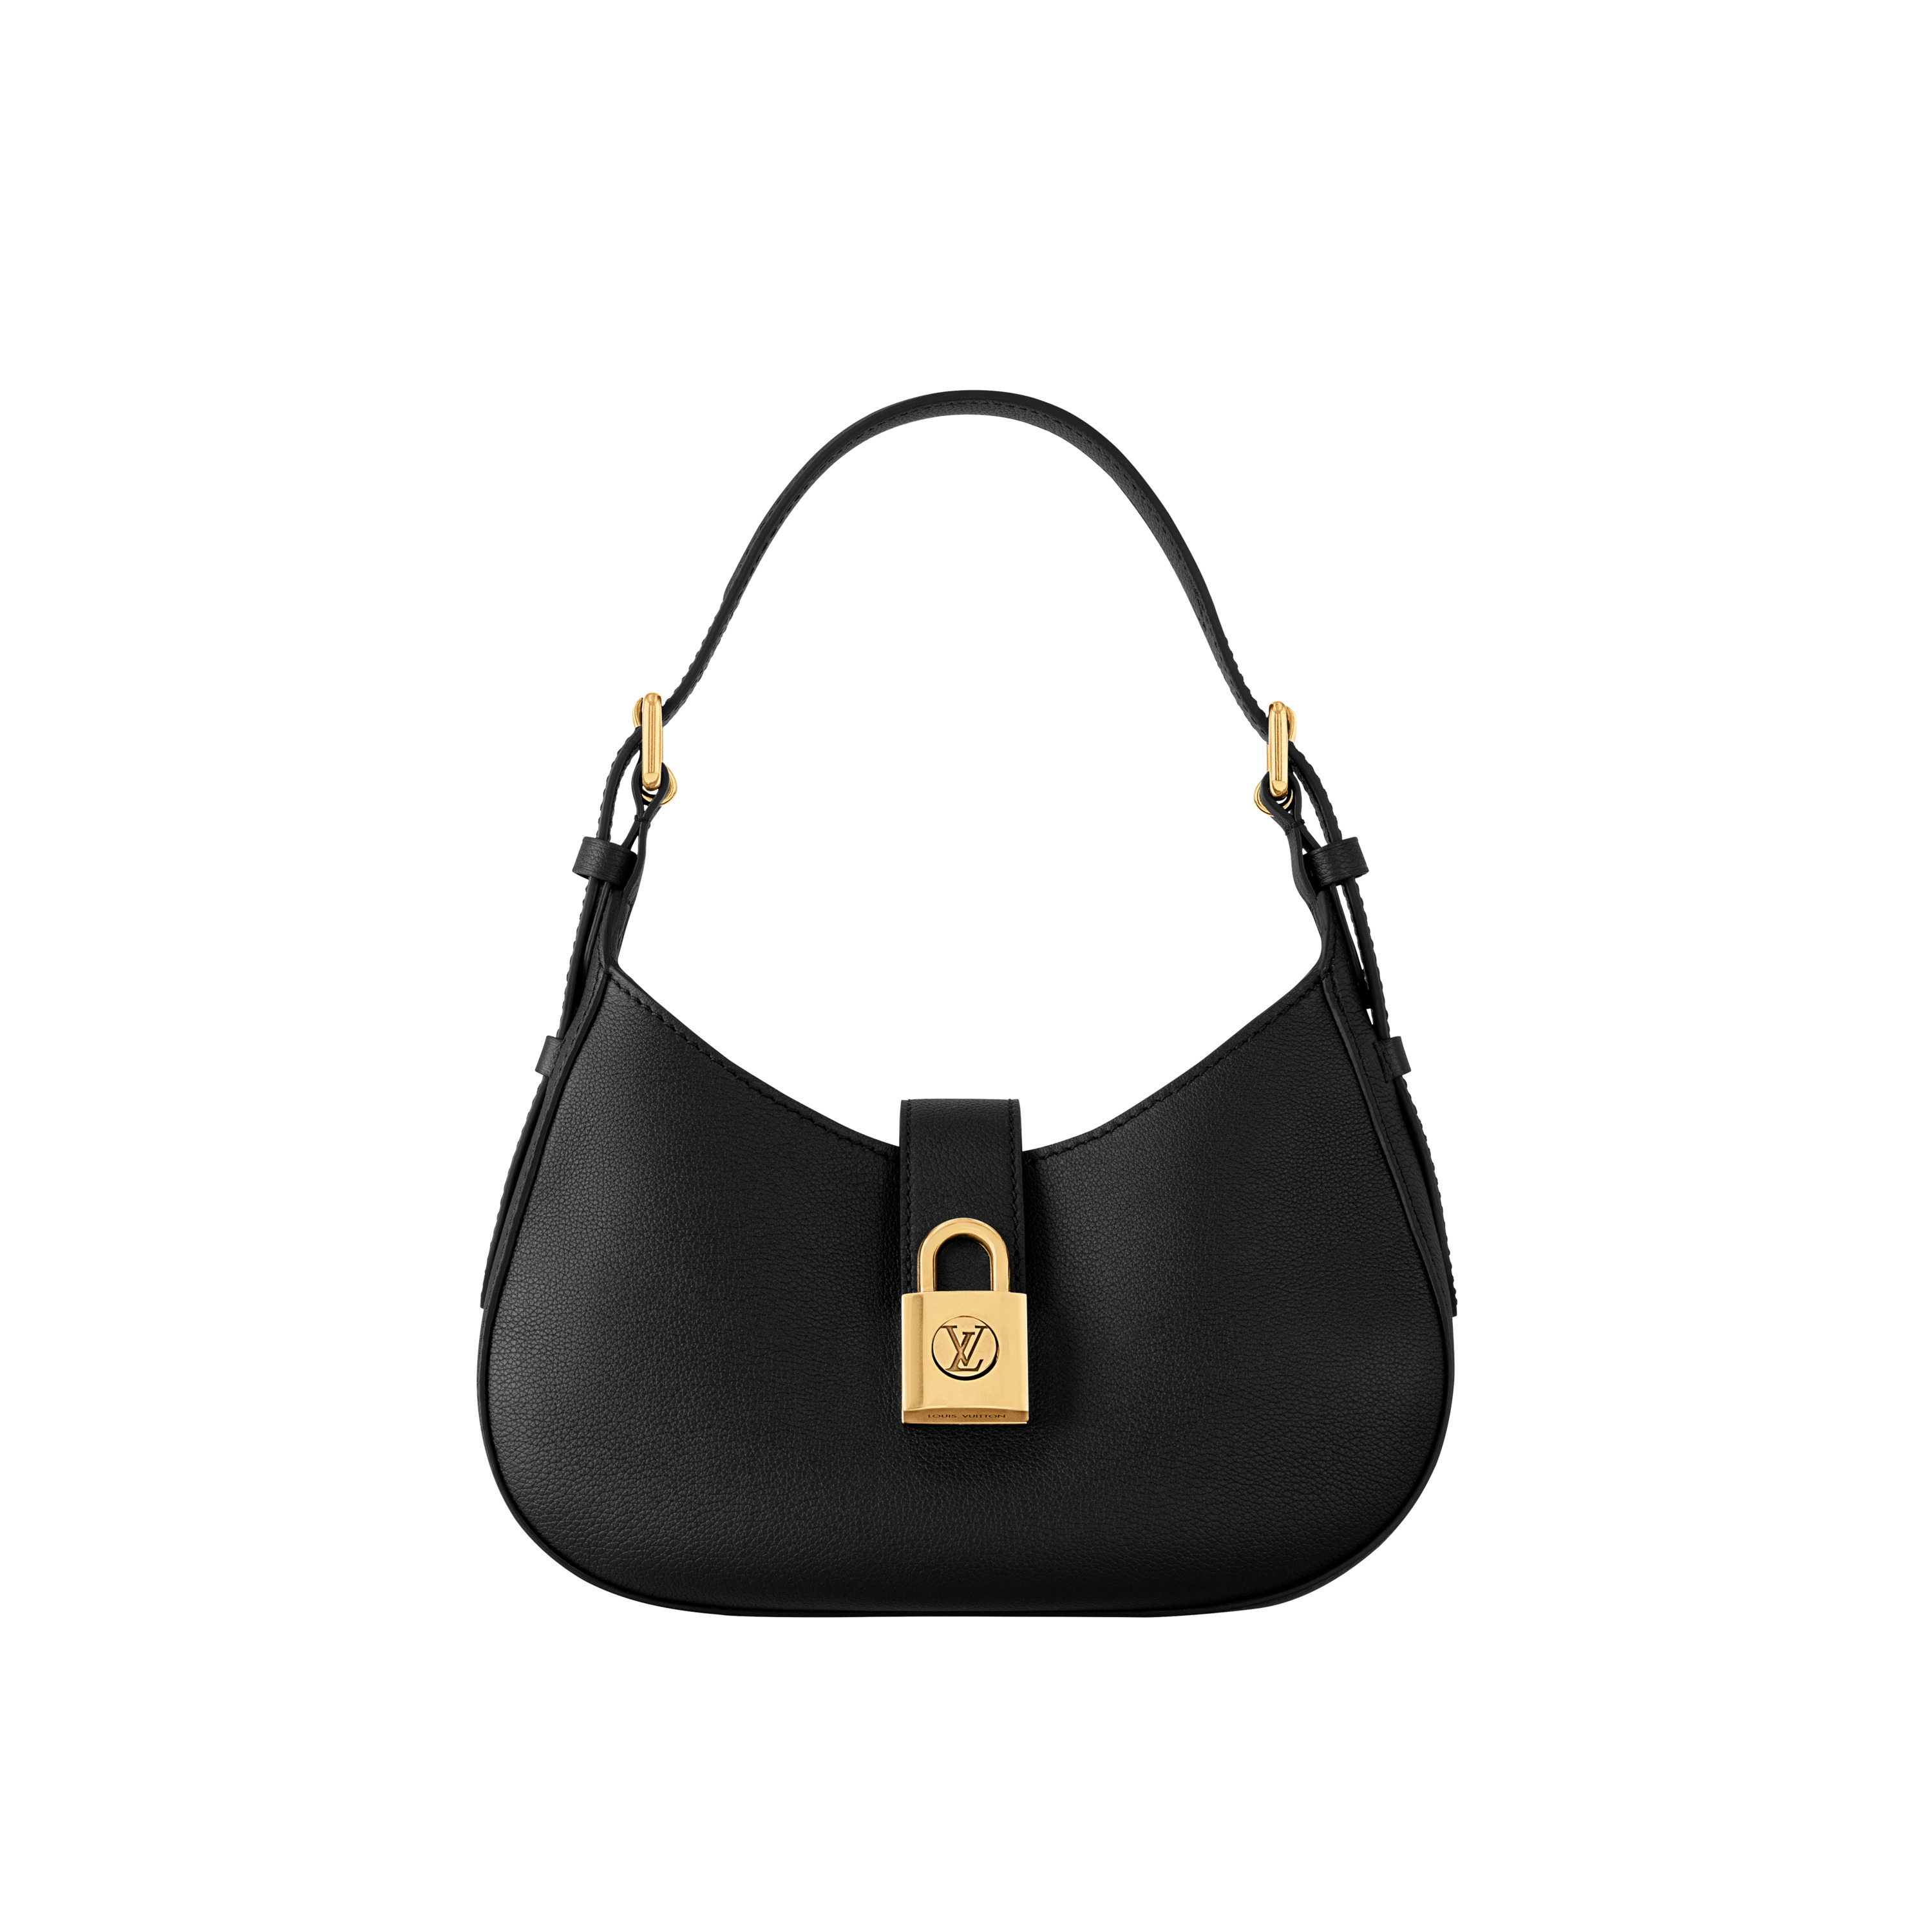 Louis Vuitton shoulder bag in black with a gold lock detail